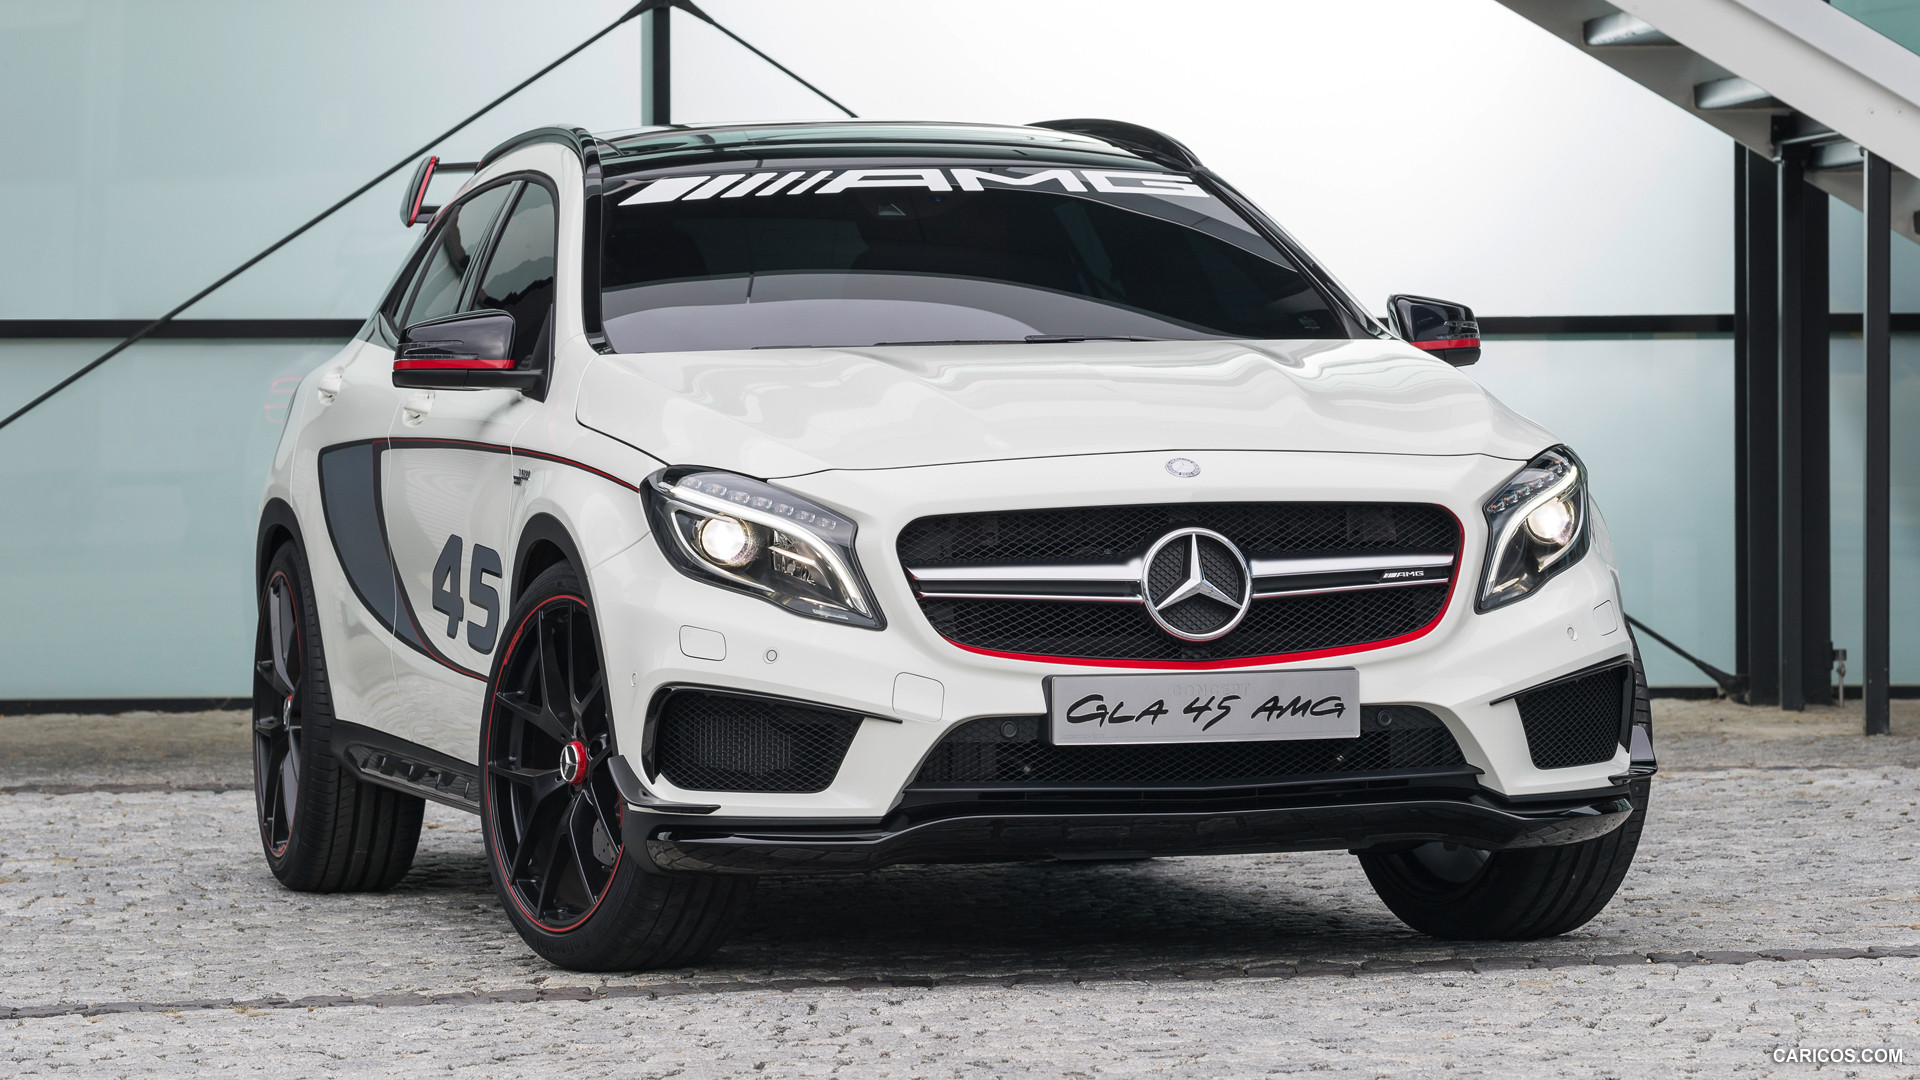 Mercedes-Benz GLA 45 AMG Concept (2013)  - Front, #1 of 15